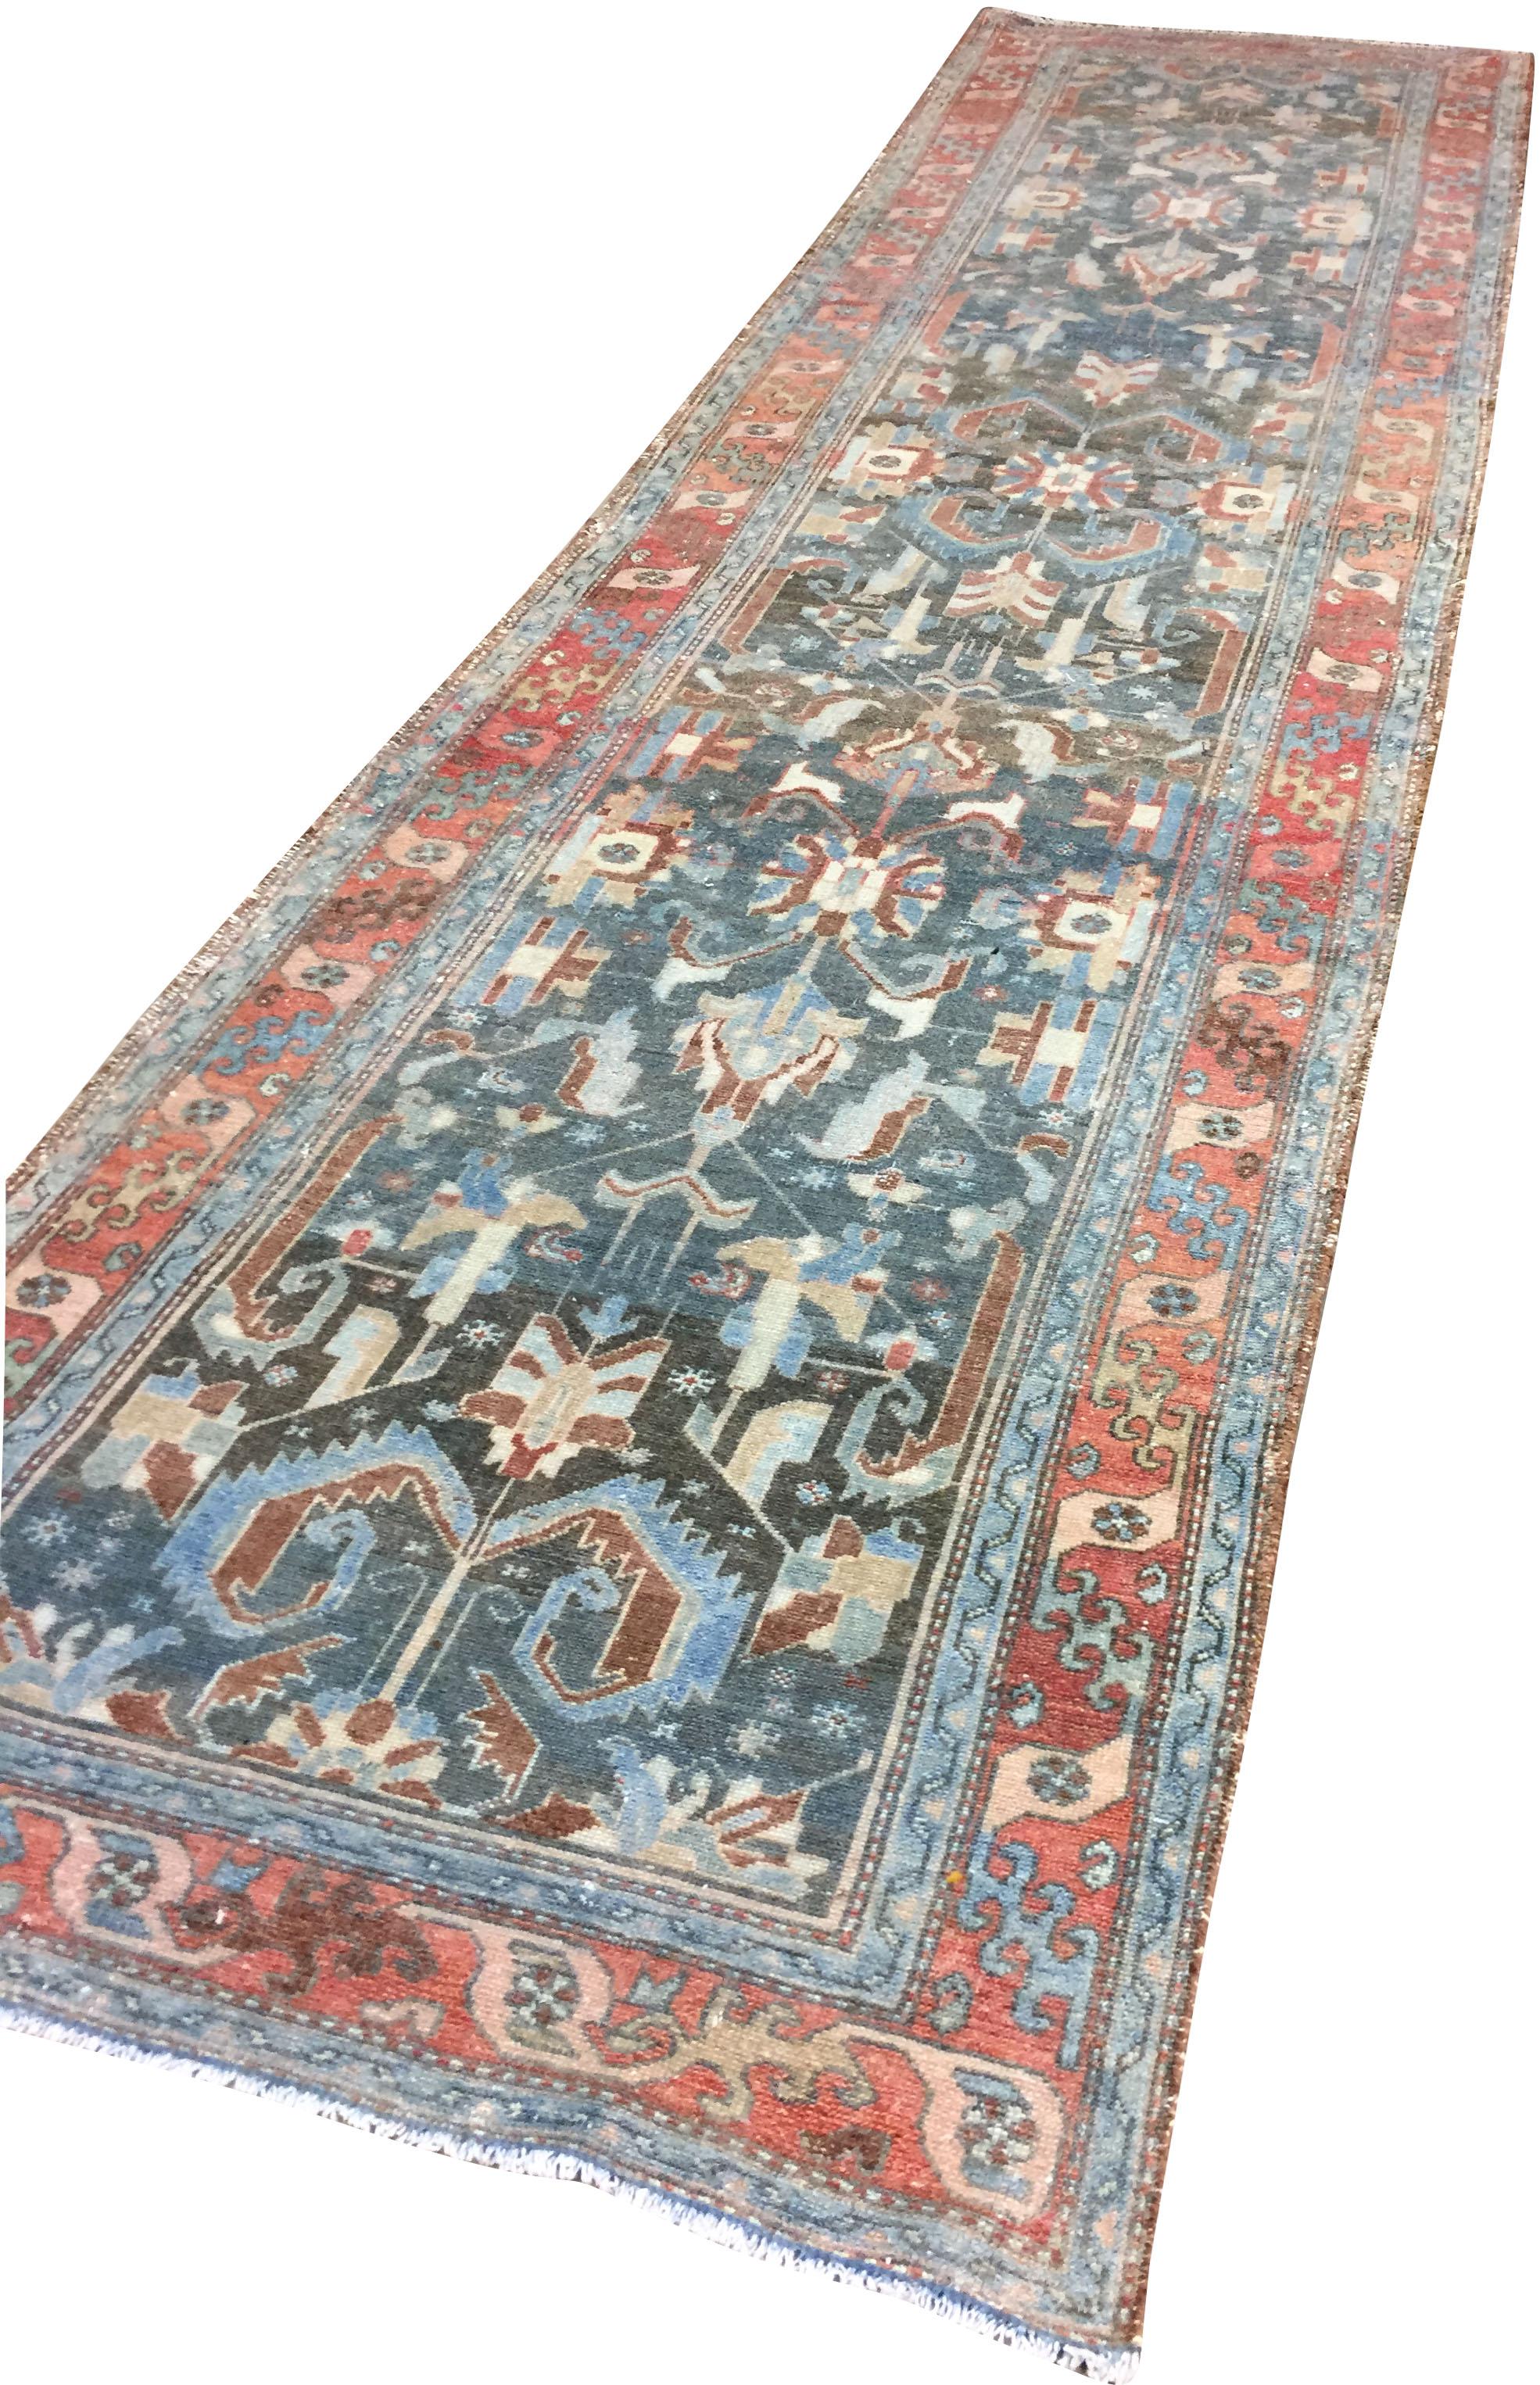 Vintage Malayer runner, circa 1920. A soft and delightful looking vintage 1920s runner handwoven in Malayer Persia. The floral and vine designs in the field and border create a piece that will enhance and add beauty to a room. Size: 3'3 x 12'10.